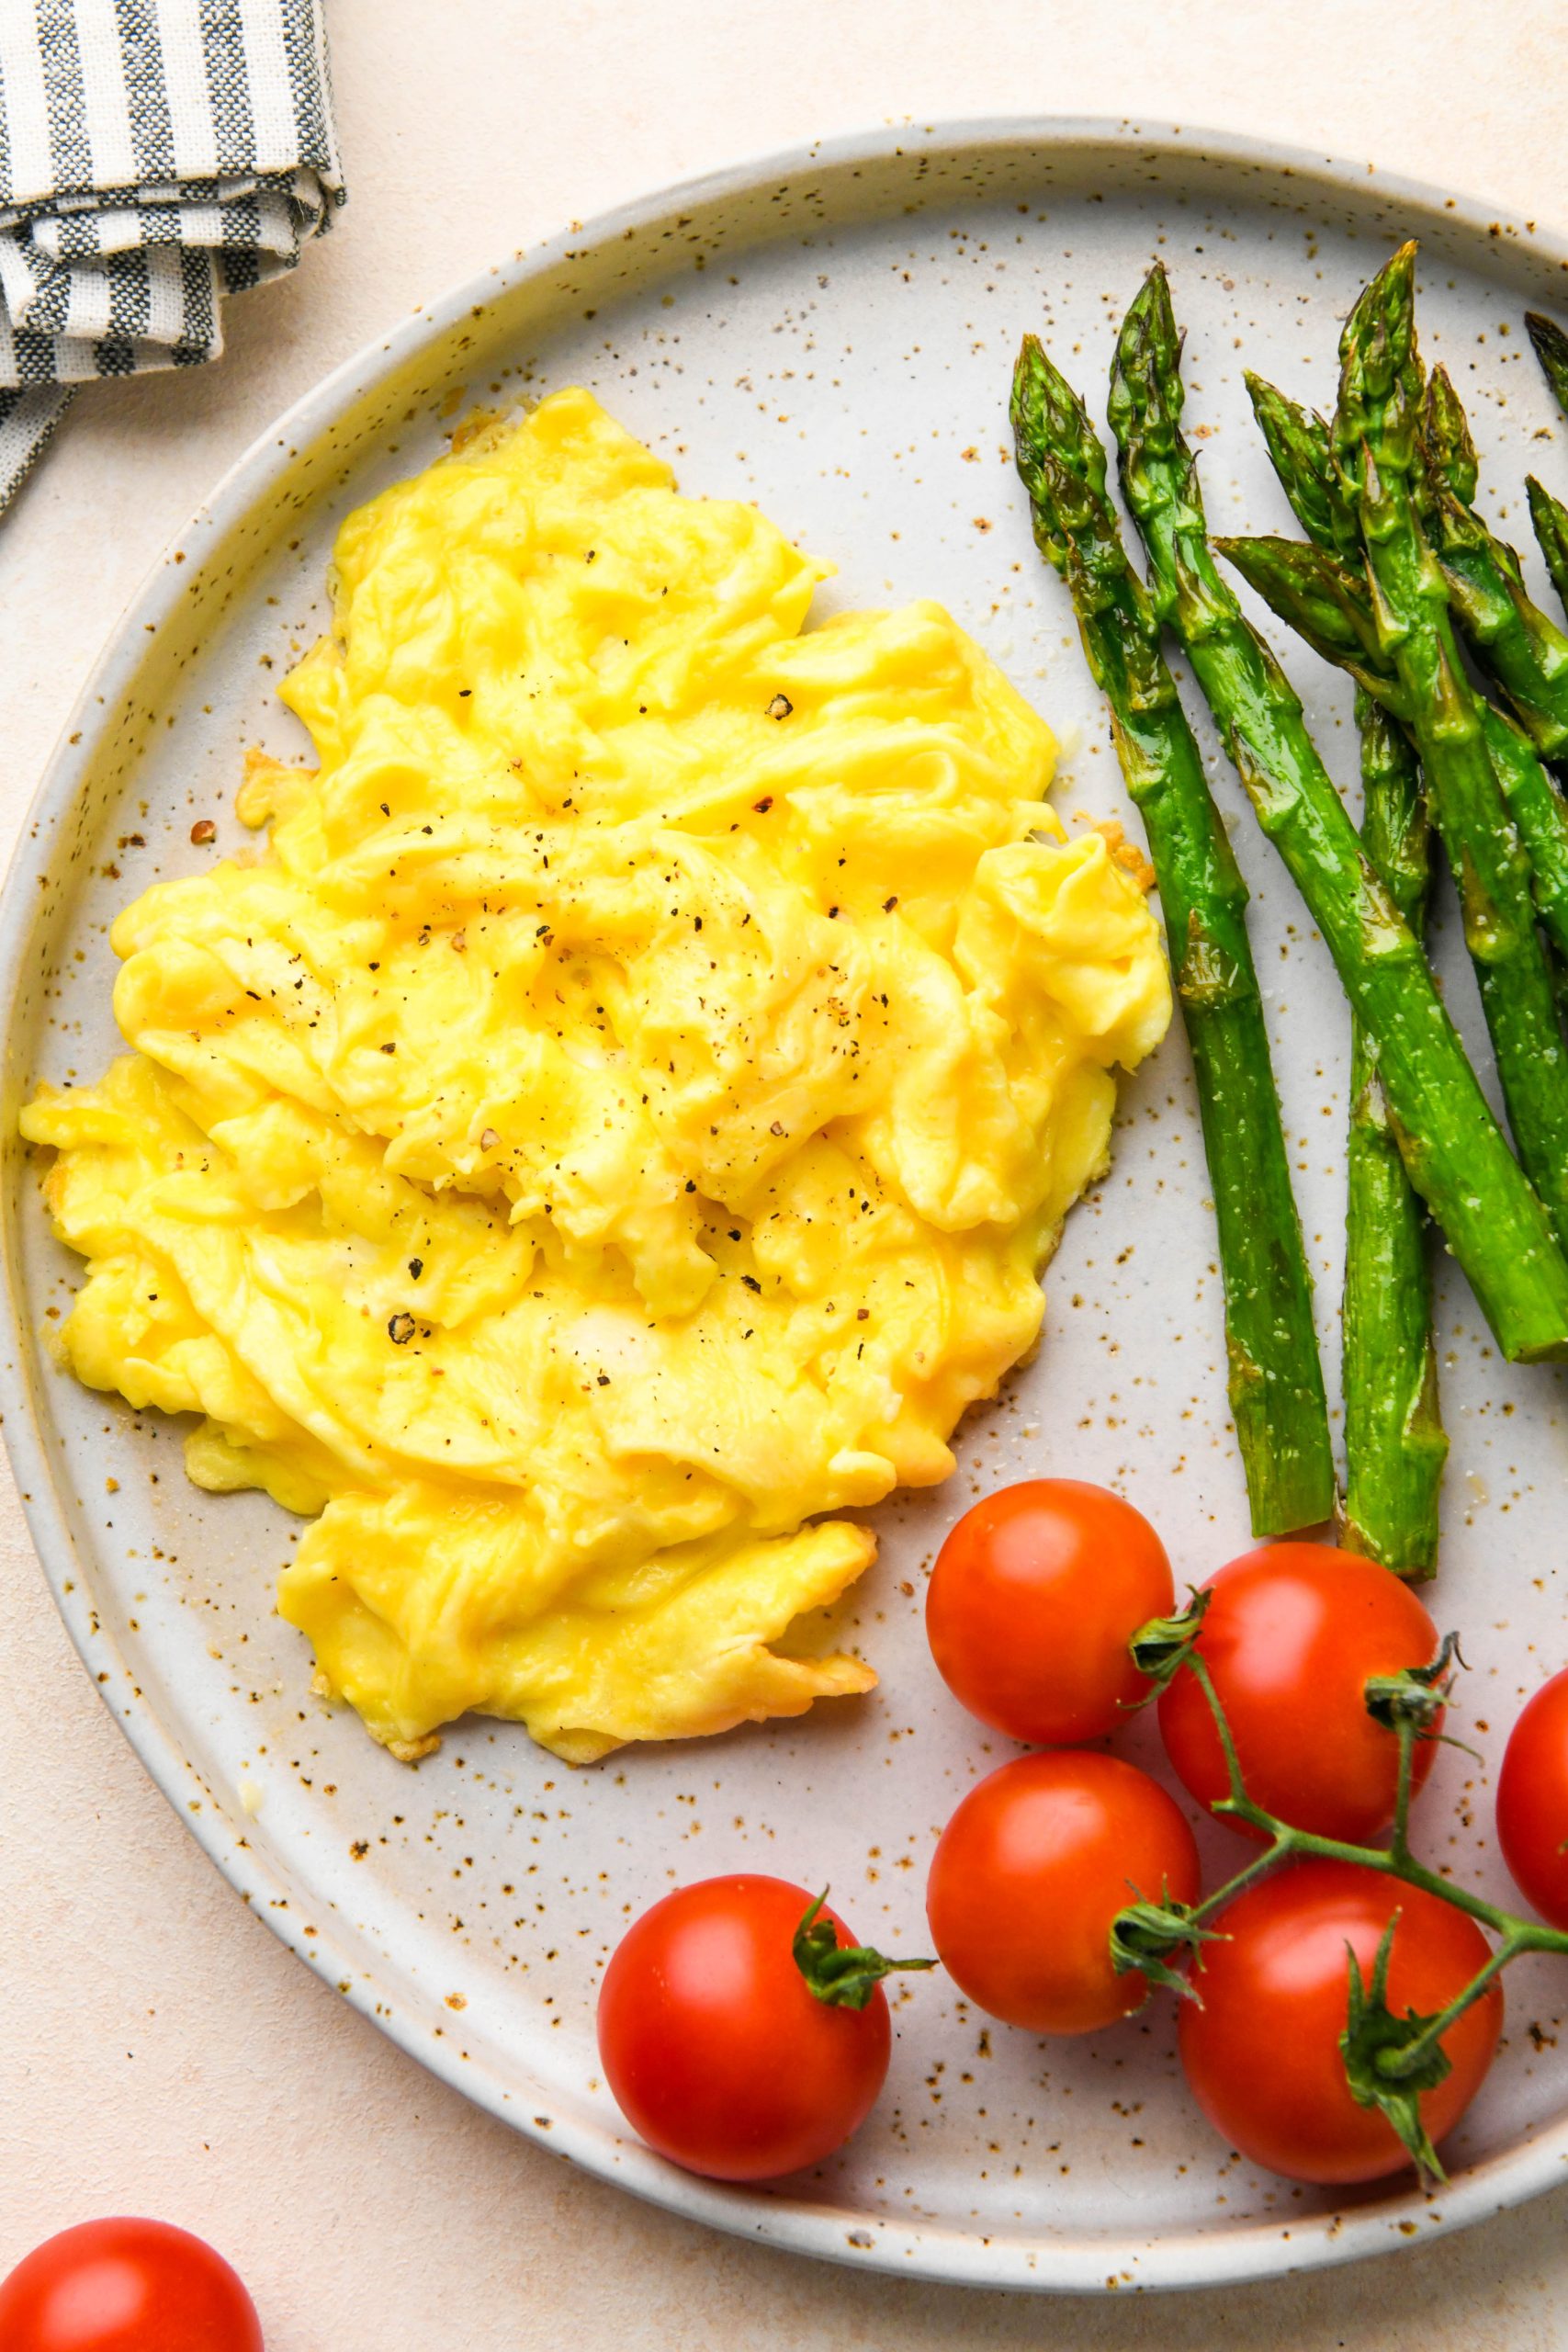 27 Hot Lunch Ideas for Family & Guests - Scrambled Chefs